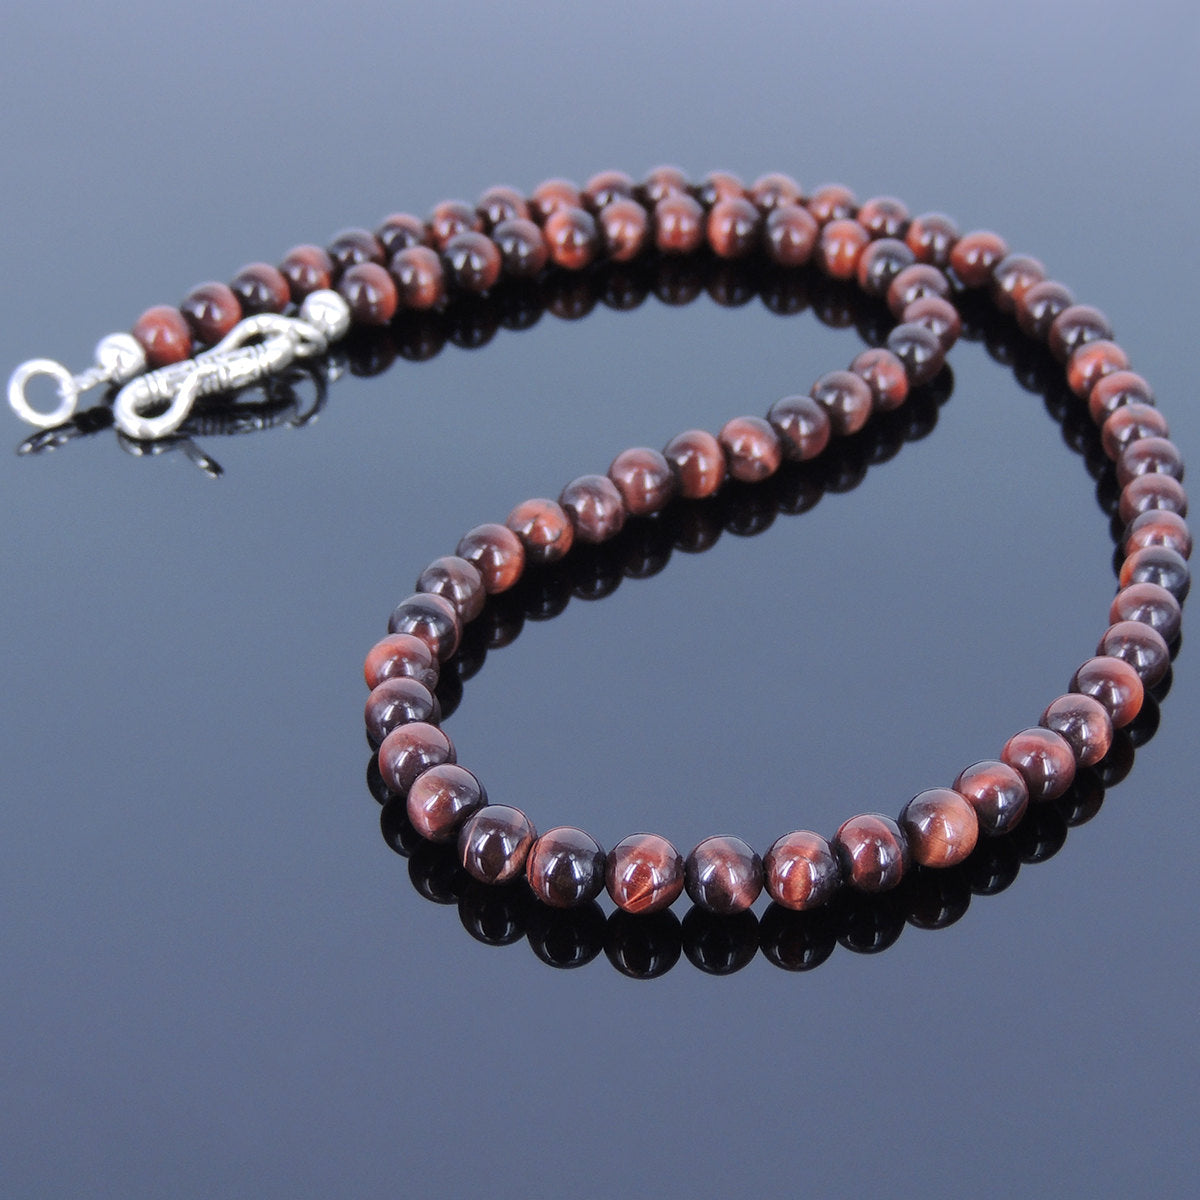 6mm Red Tiger Eye Healing Gemstone Necklace with S925 Sterling Silver Spacers & Clasp - Handmade by Gem & Silver NK036